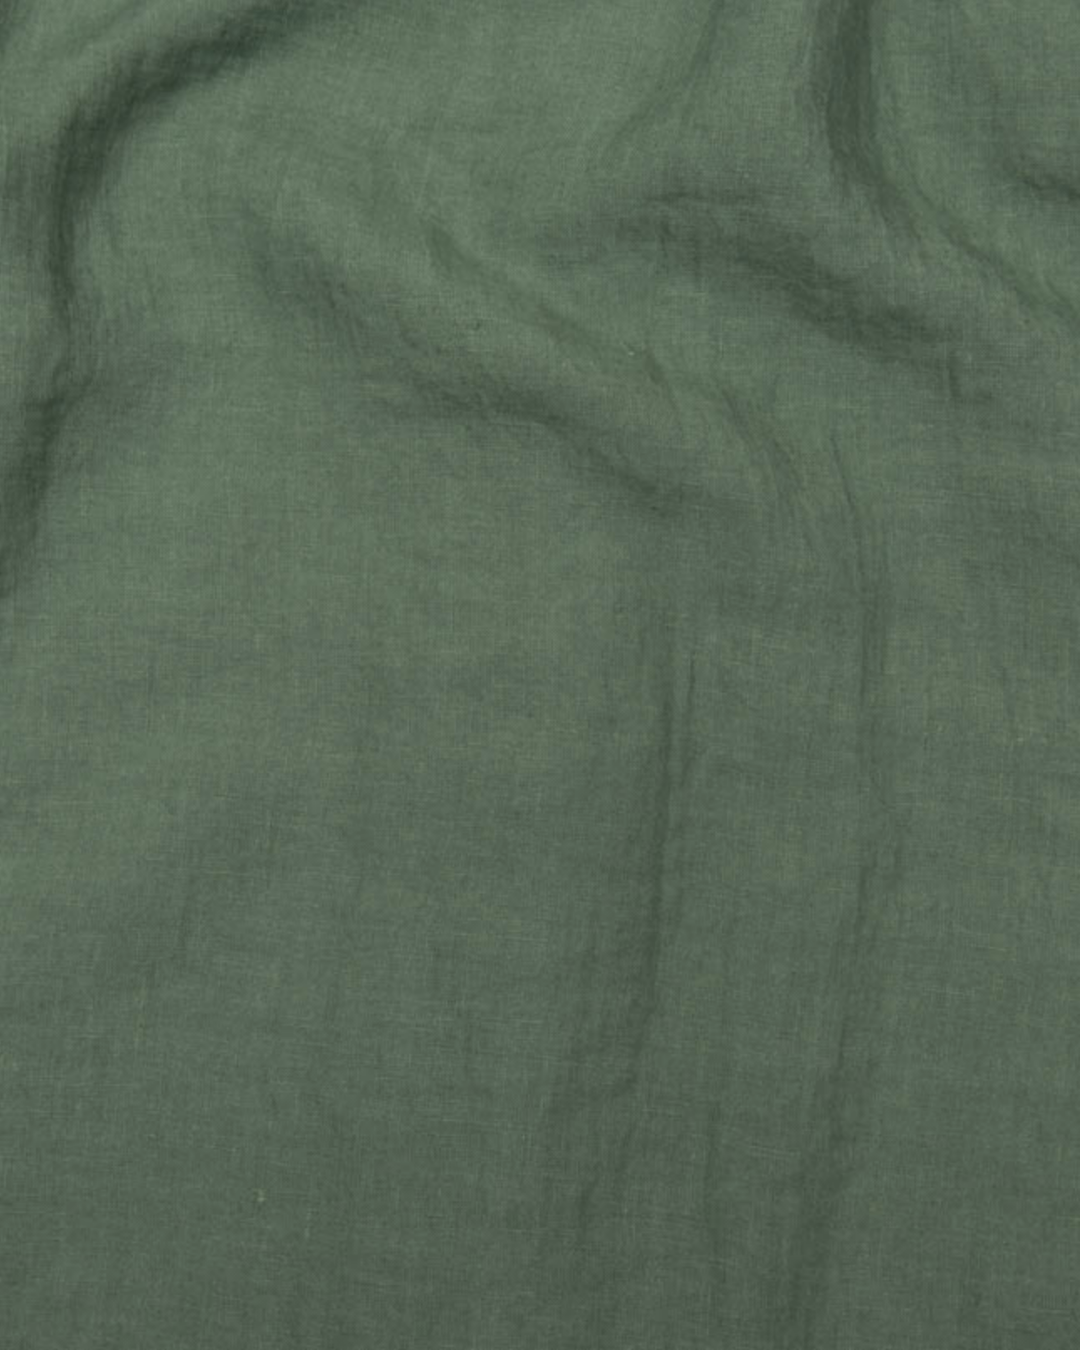 a close up of a green cloth with a black dot on it